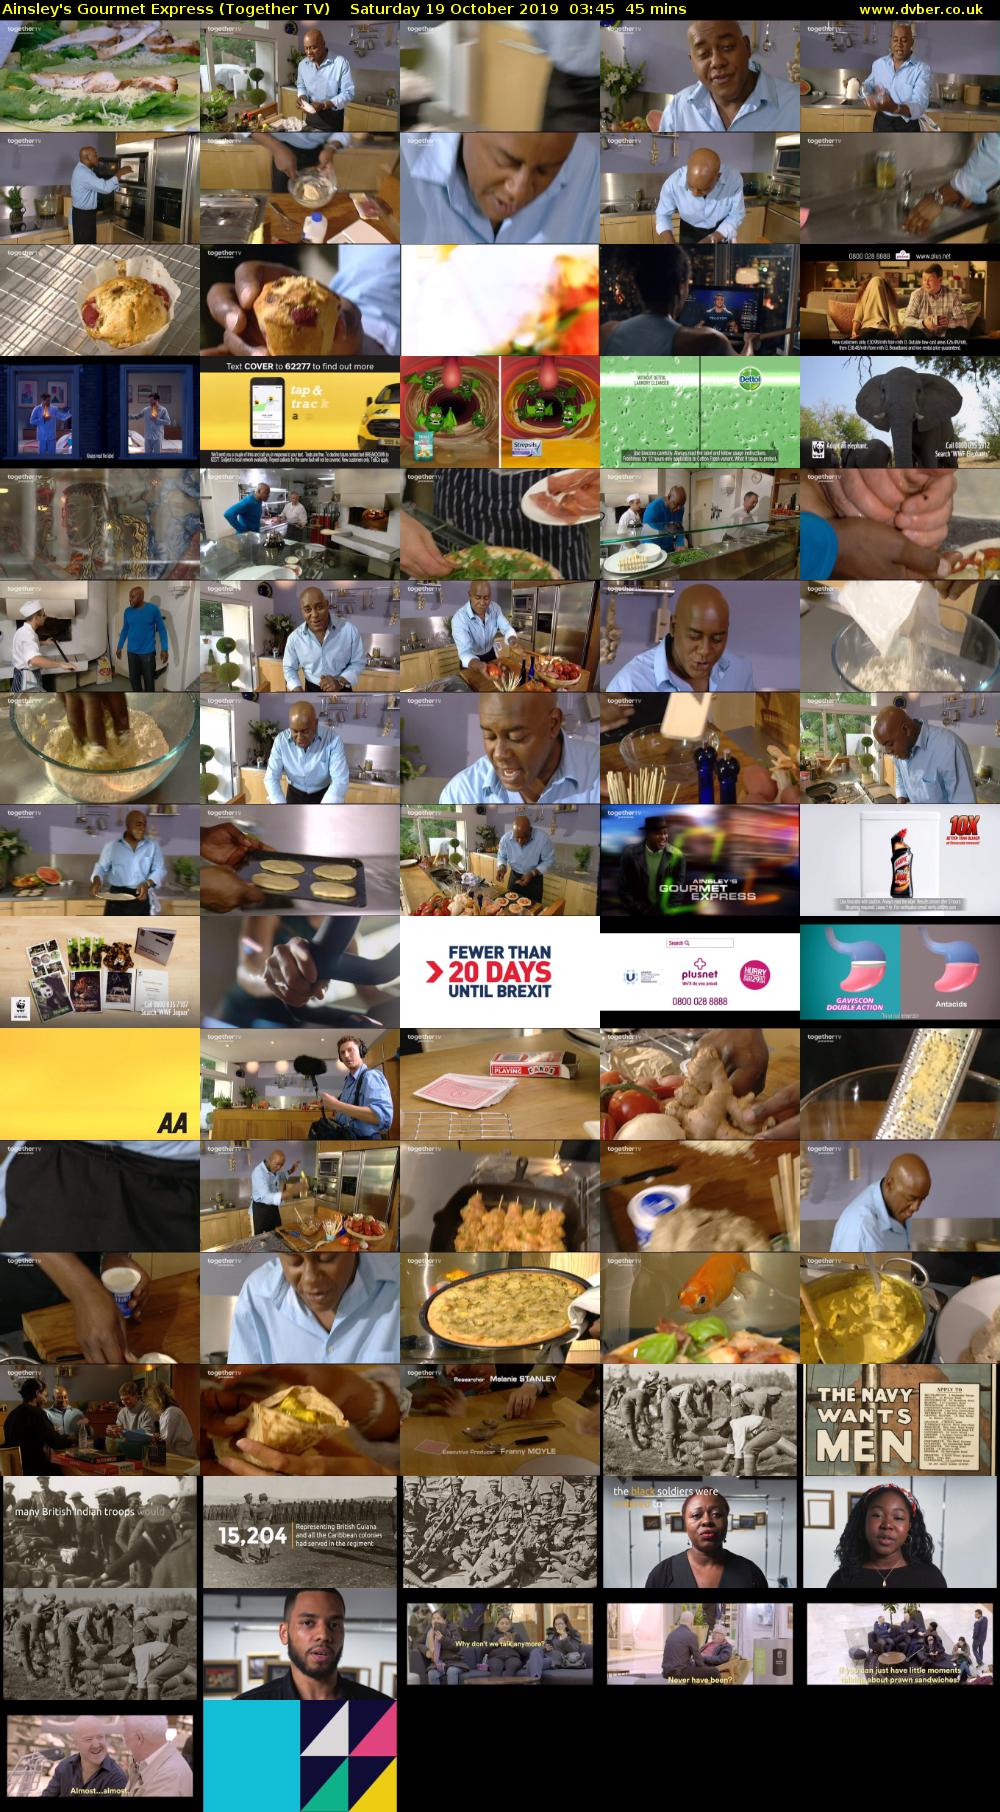 Ainsley's Gourmet Express (Together TV) Saturday 19 October 2019 03:45 - 04:30